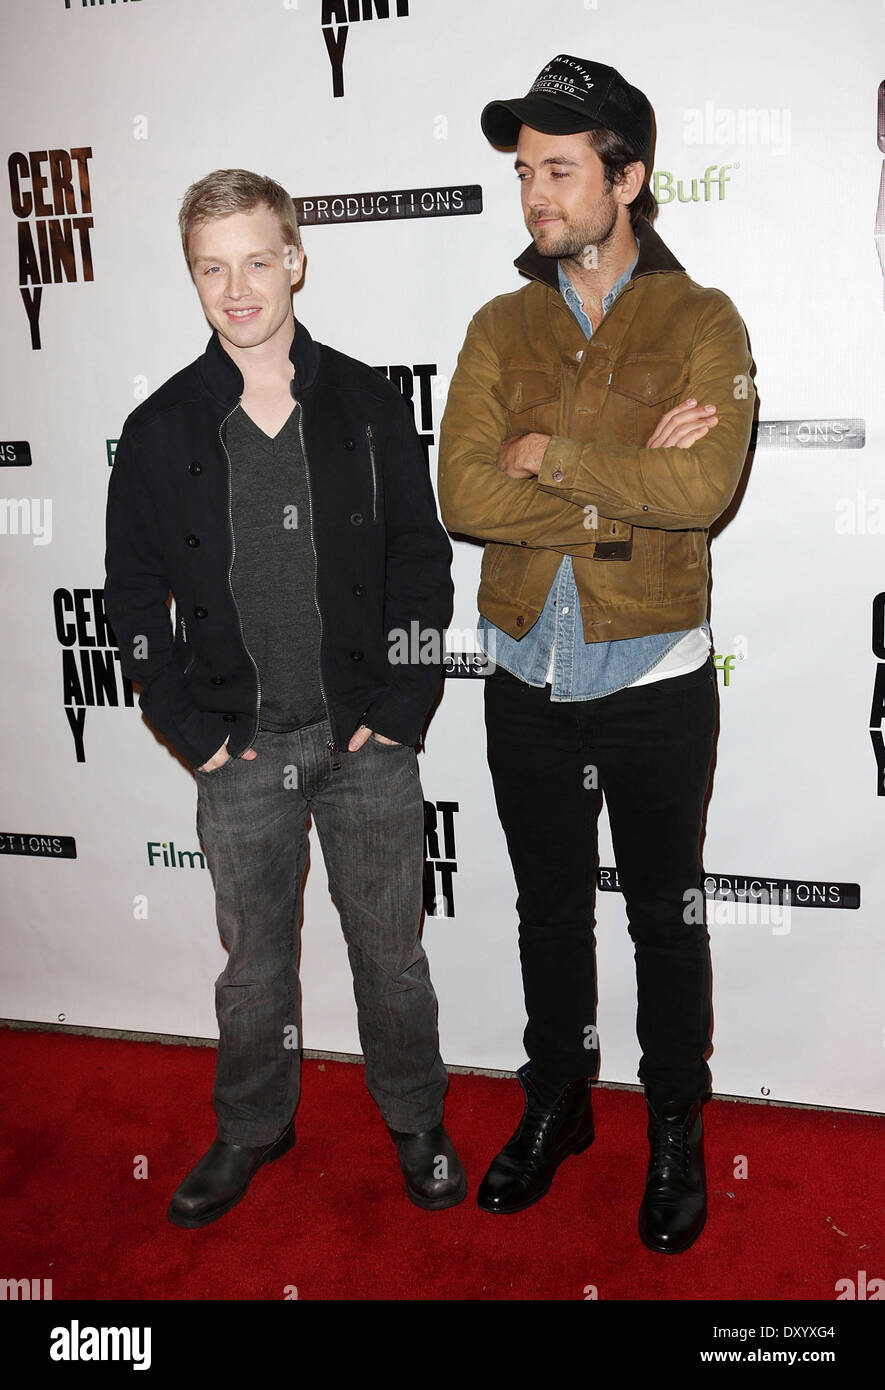 The Los Angeles premiere of 'Certainty' at Laemmle Music Hall - Arrivals Featuring: Noel Fisher,Justin Chatwin Where: Los Angeles California USA When: 27 Nov 2012 Stock Photo